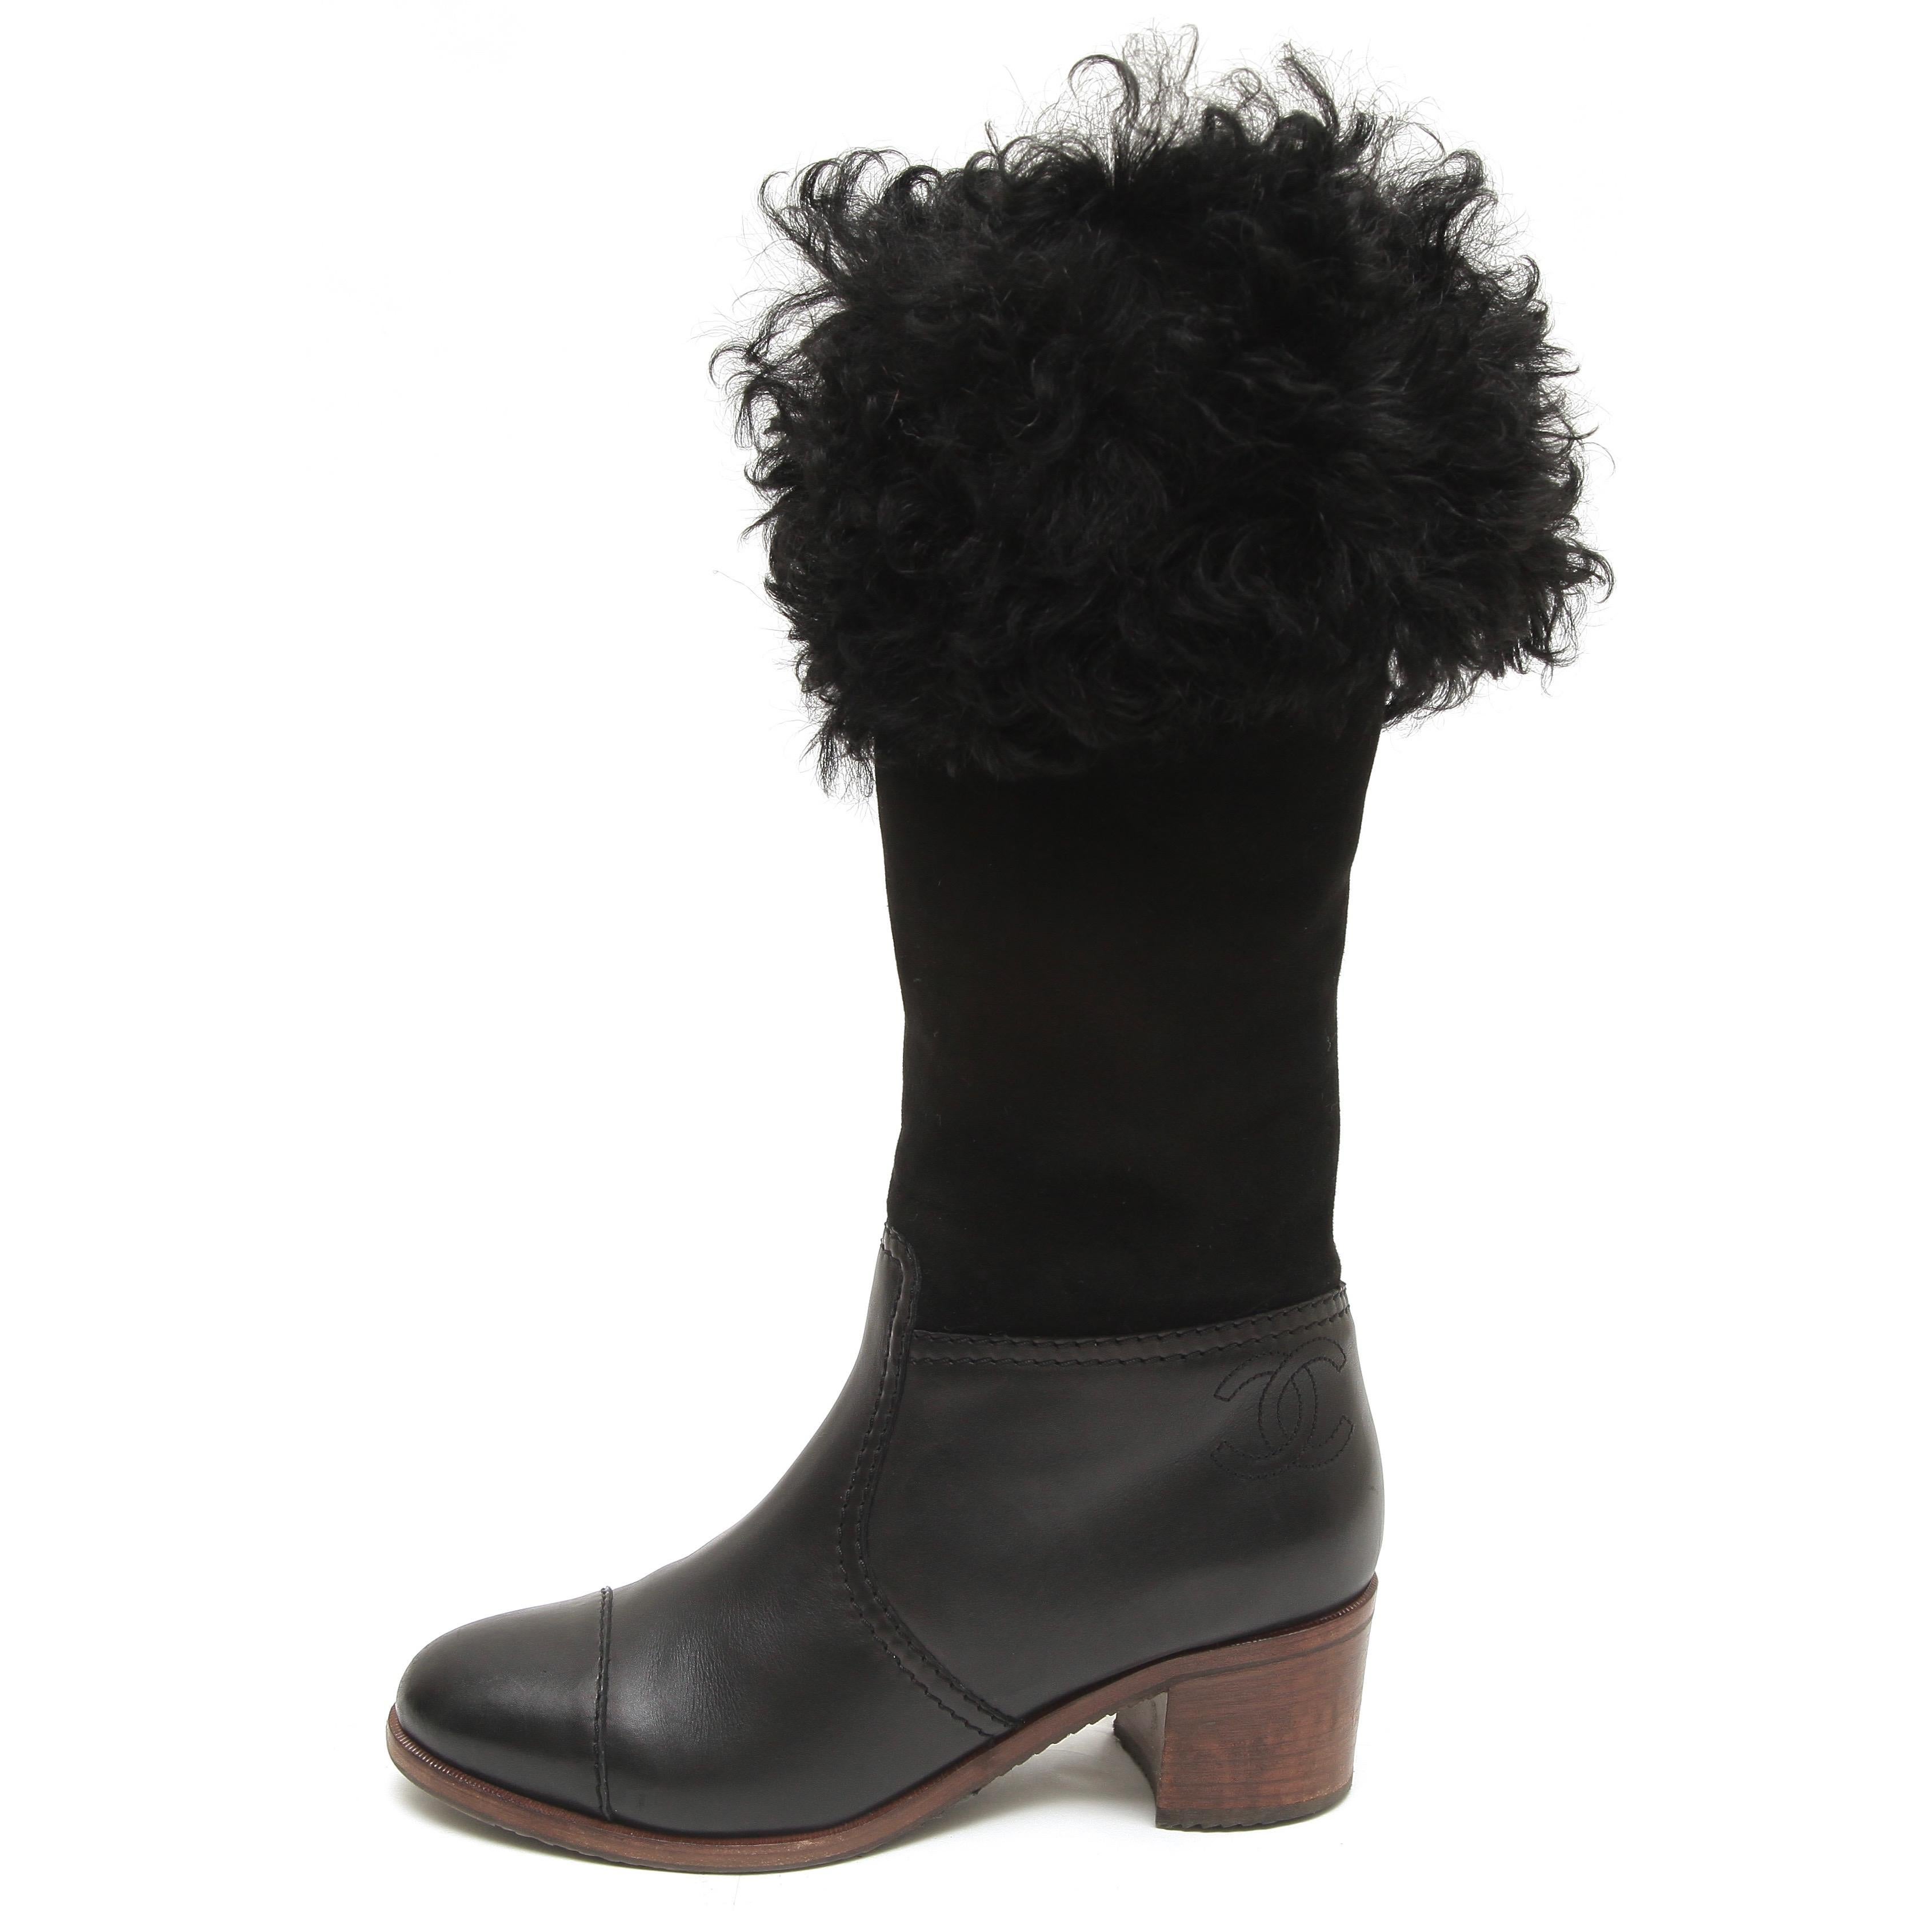 CHANEL Boots Black Suede Leather Mid-Calf Fur CC Cap Toe Block Sz 40 2015 15B In Good Condition For Sale In Hollywood, FL